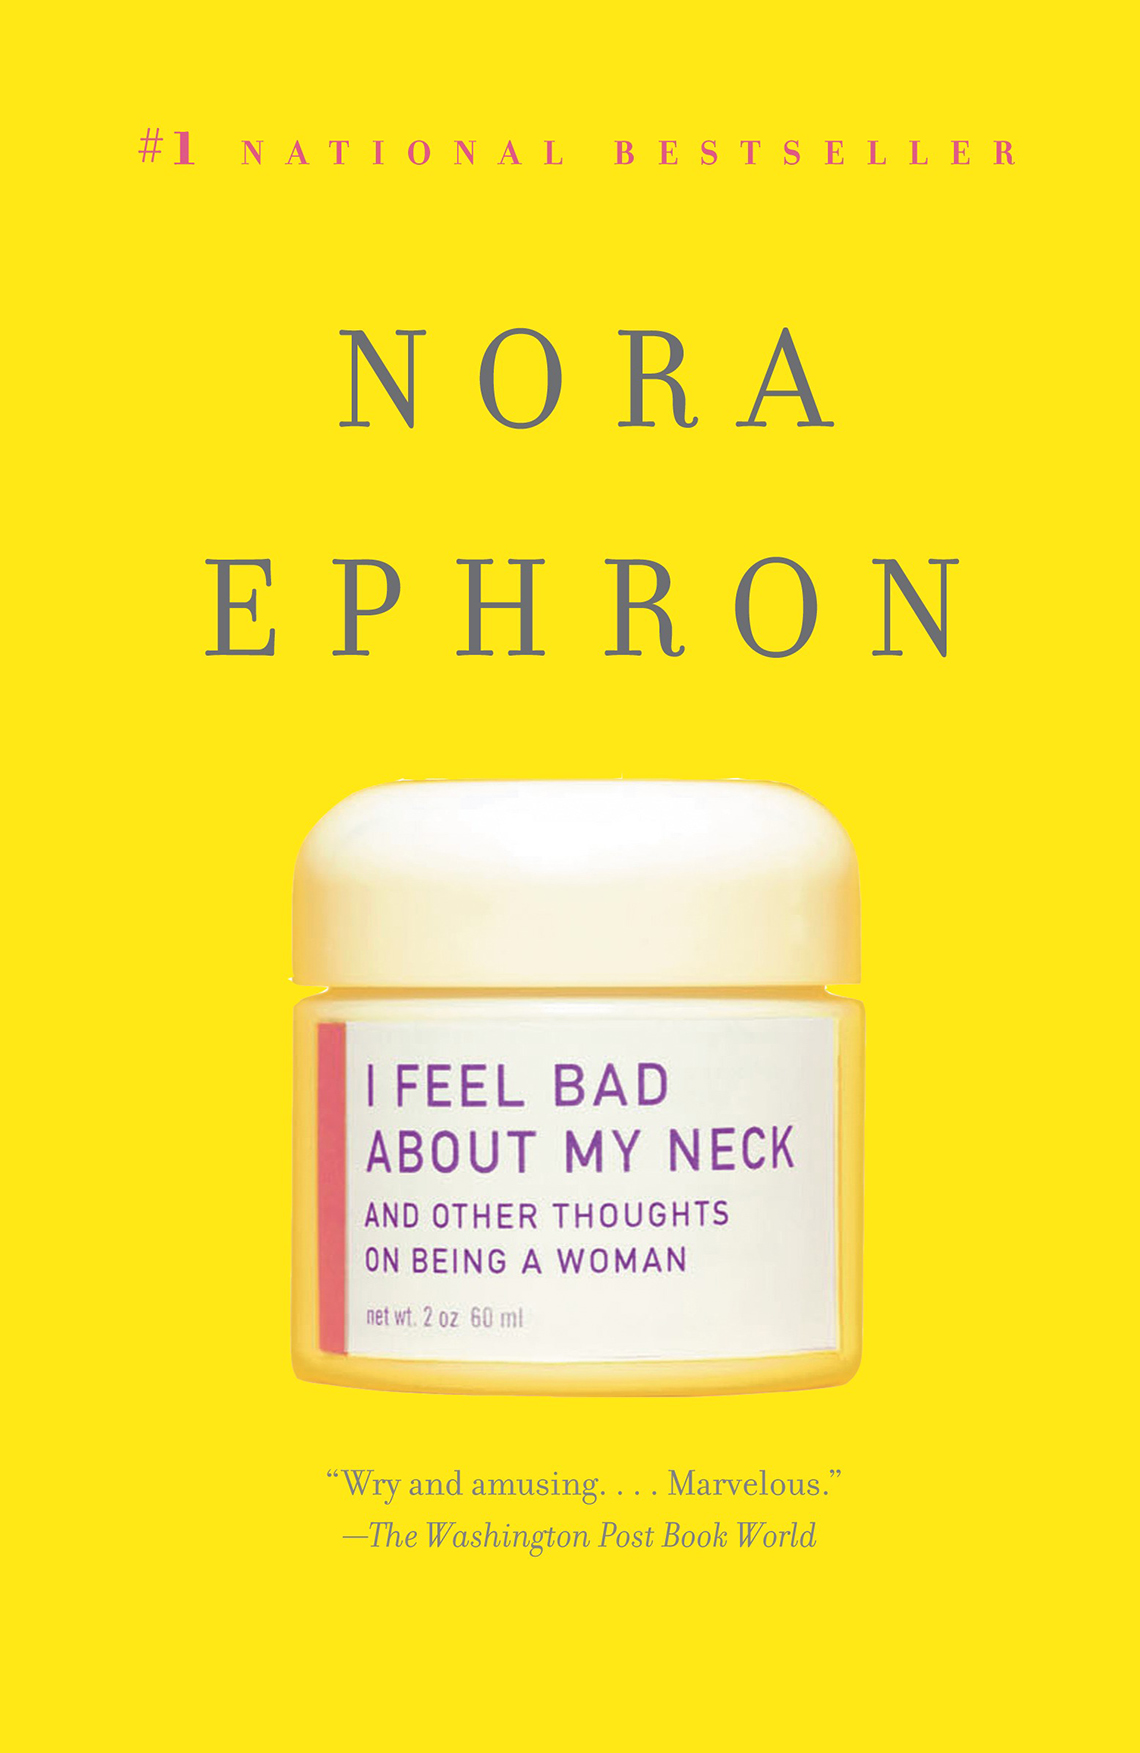 i feel bad about my neck and other thoughts on being a woman book by nora ephron